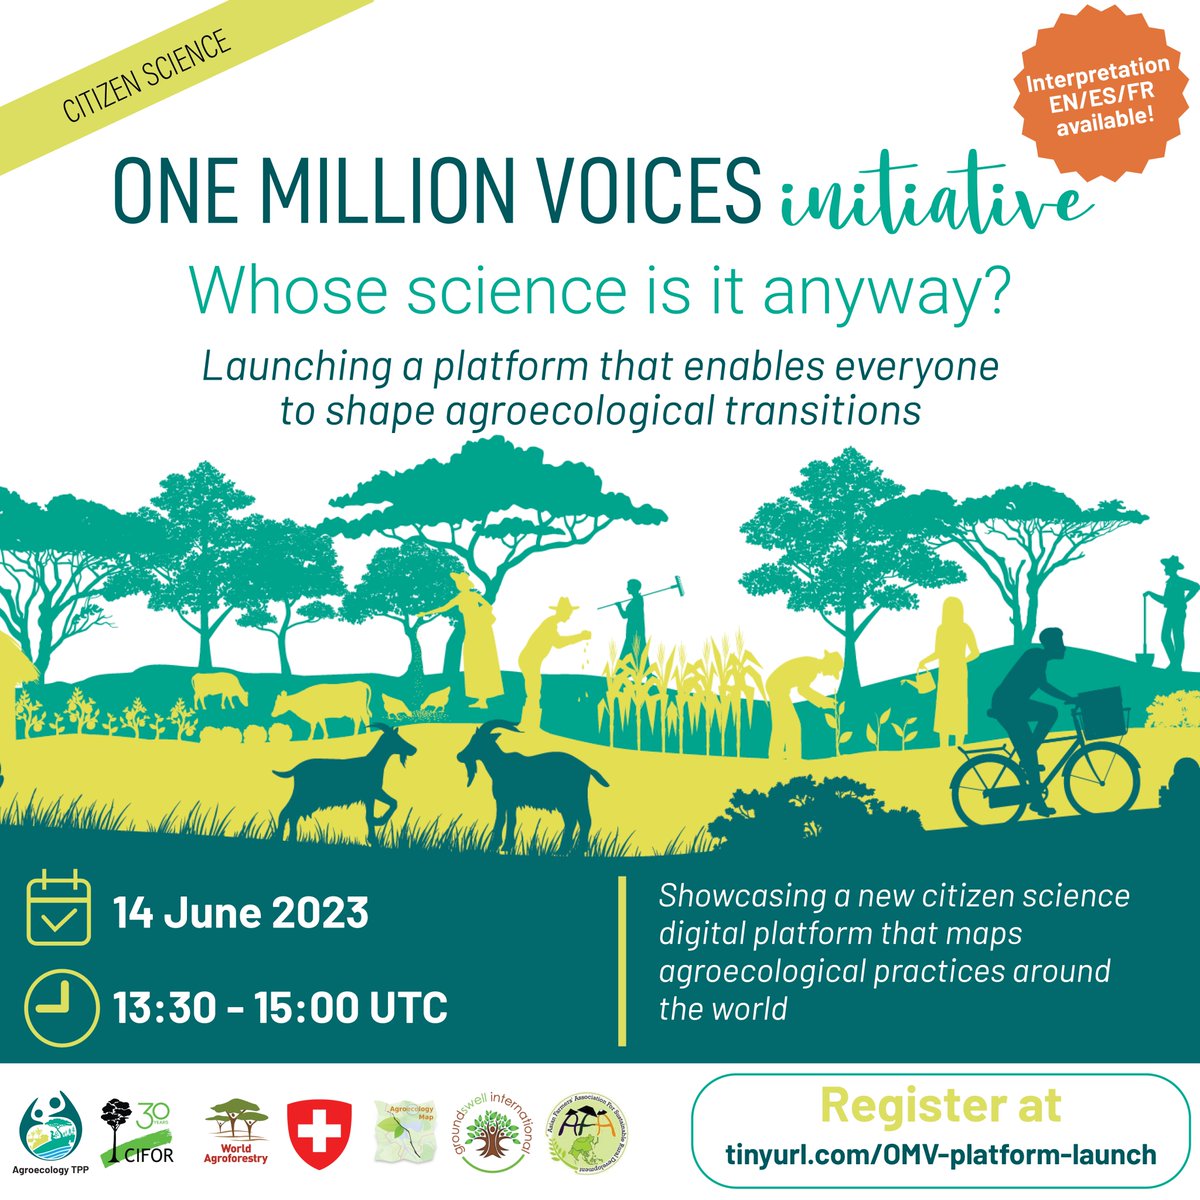 On 14 June, the #AgroecologyTPP will launch the One Million Voices #citizenscience digital platform, which will allow farmers, producers & consumers to co-create knowledge & participate in agroecology movement around the world.

Register at tinyurl.com/OMV-platform-l… #aetpp